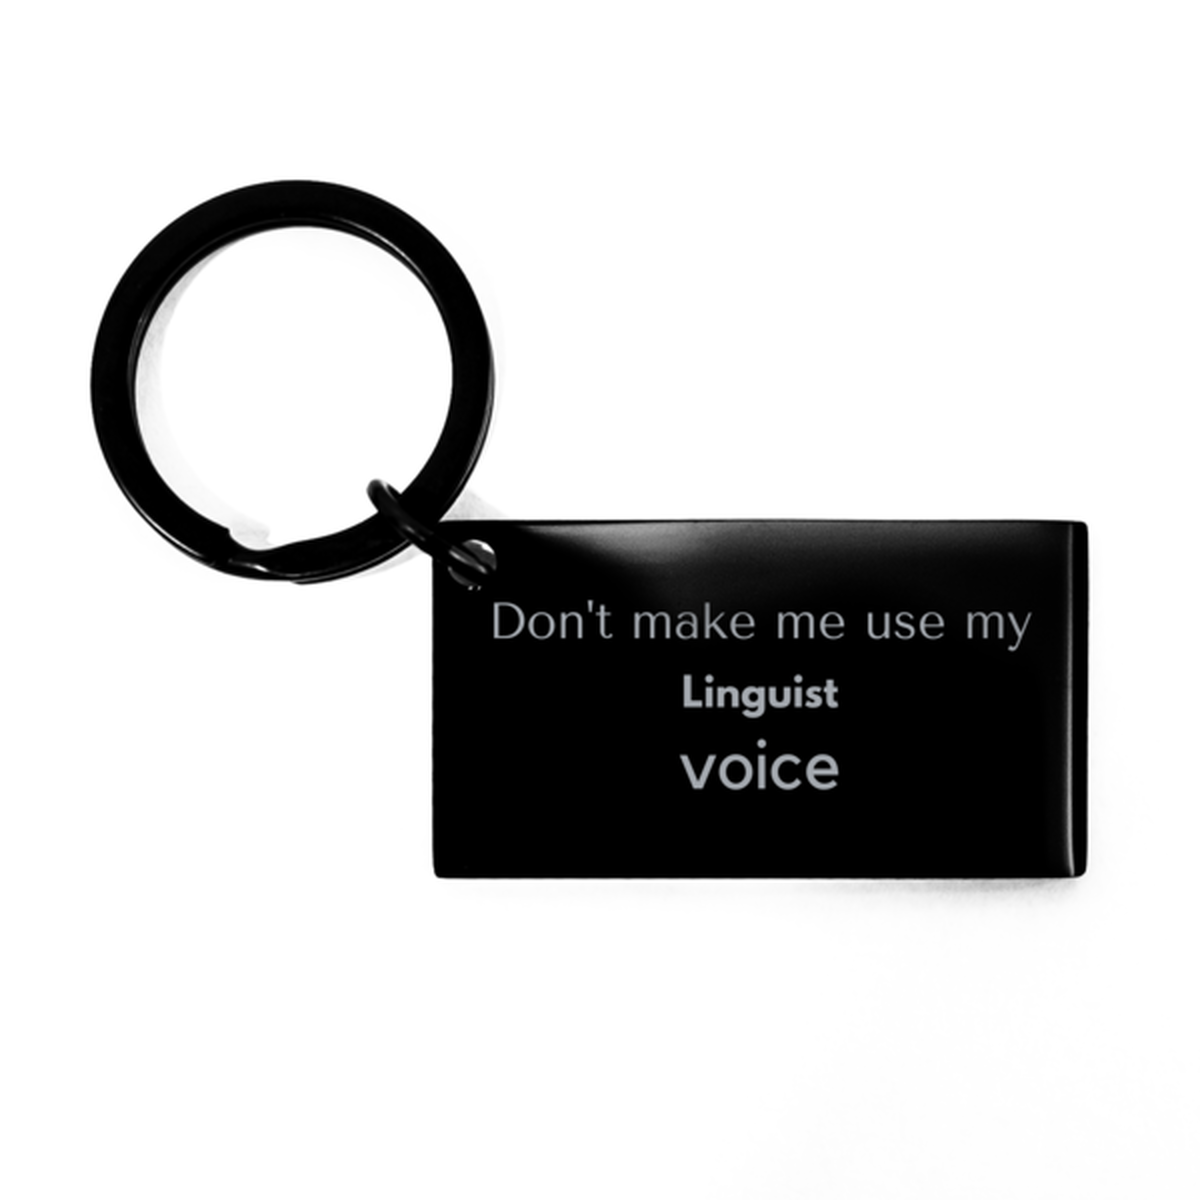 Don't make me use my Linguist voice, Sarcasm Linguist Gifts, Christmas Linguist Keychain Birthday Unique Gifts For Linguist Coworkers, Men, Women, Colleague, Friends